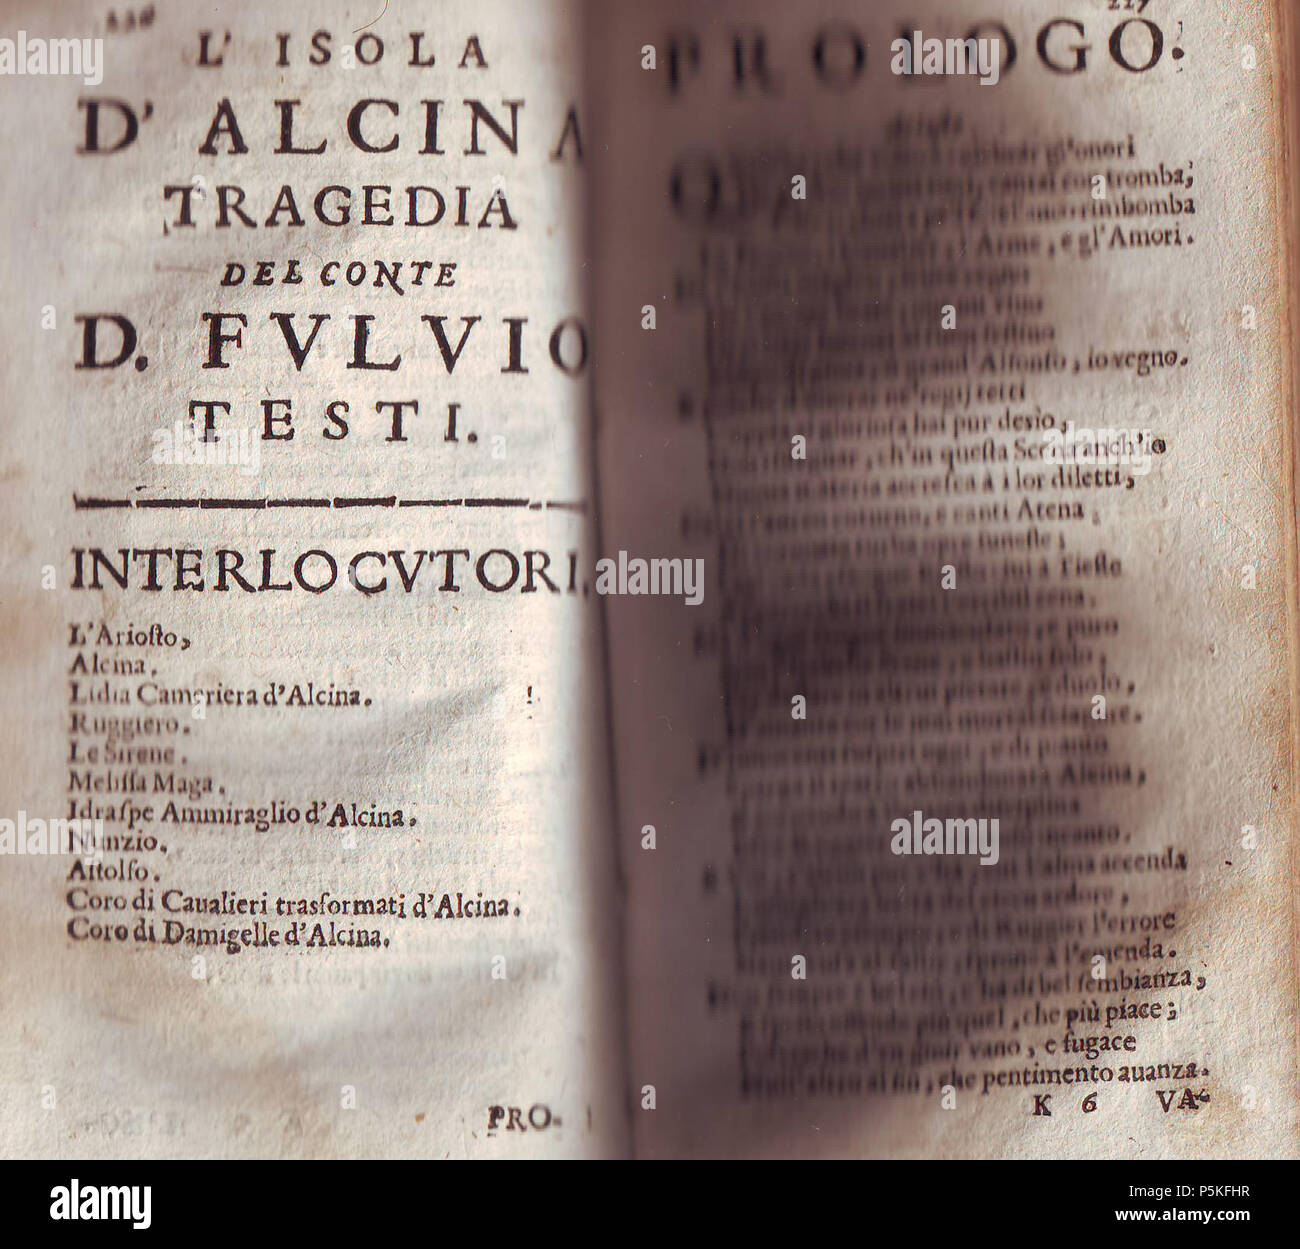 N/A. English: First page of 'L'isola di Alcina', tragedy by Fulvio Testi, italian poet of XVIIth Century. 1701.   Fulvio Testi  (1593–1646)       Description Italian diplomat, poet and politician  Date of birth/death 23 August 1593 28 August 1646  Location of birth/death Ferrara Modena  Work period 17th century  Authority control  : Q594614 VIAF:73902706 ISNI:0000 0000 6633 3239 LCCN:nr97010434 Open Library:OL2106782A GND:117275514 WorldCat 77 Alcina Stock Photo